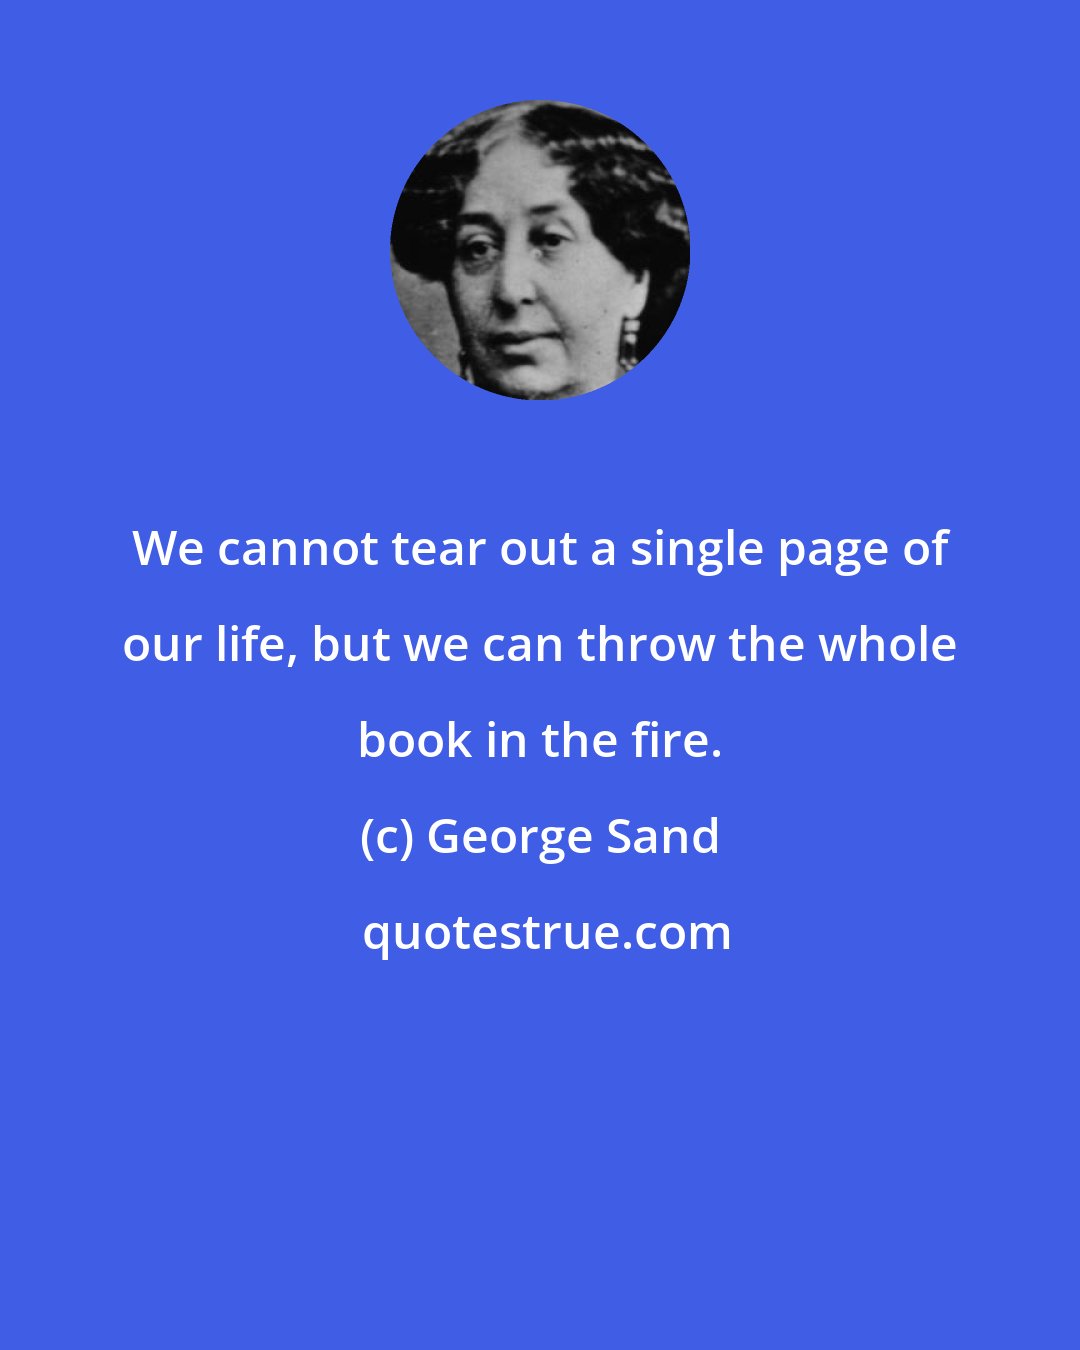 George Sand: We cannot tear out a single page of our life, but we can throw the whole book in the fire.